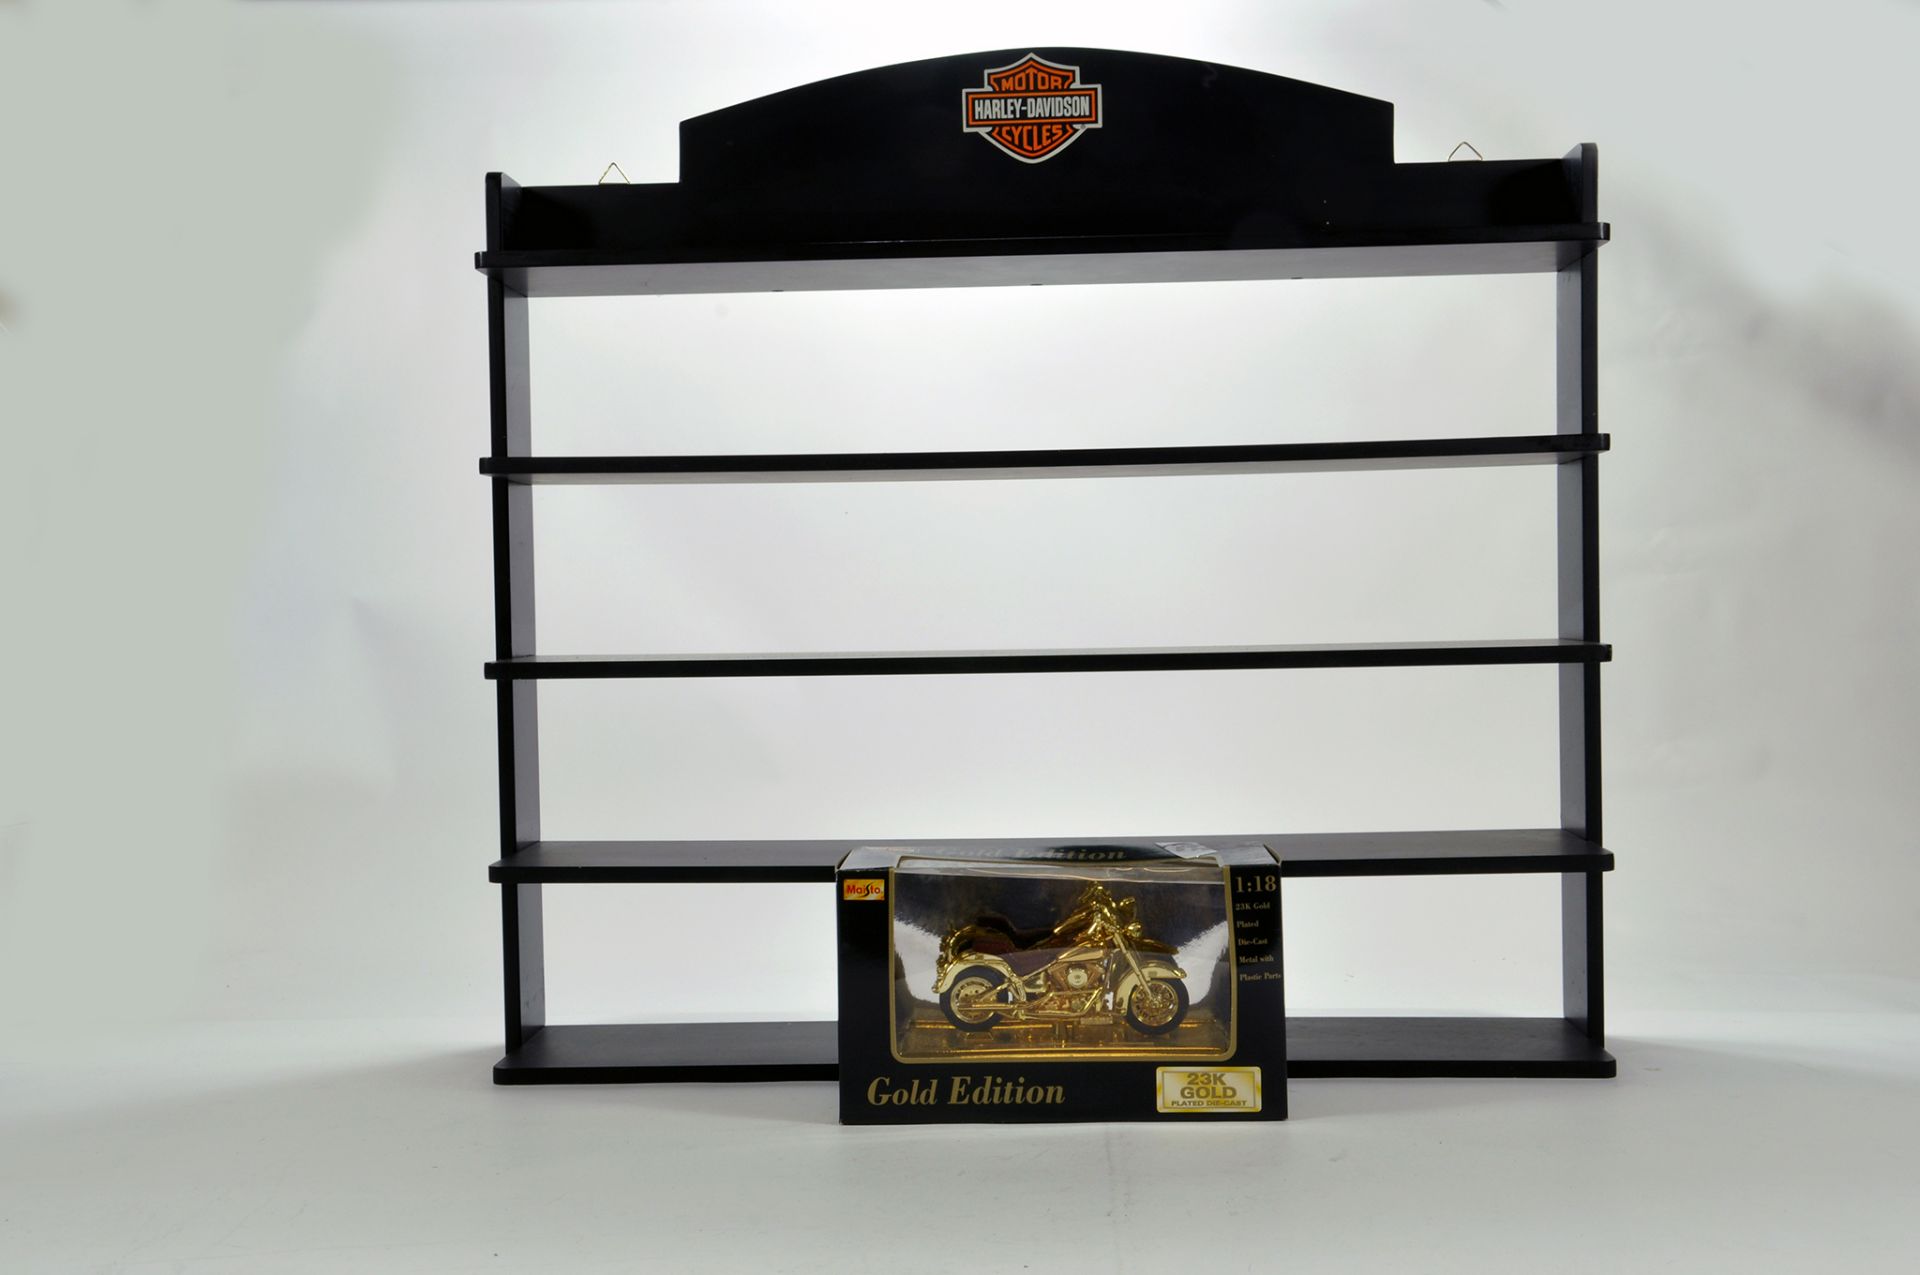 Harley Davidson Motorcycle Model Presentation Shelving plus Special Gold Edition issue.